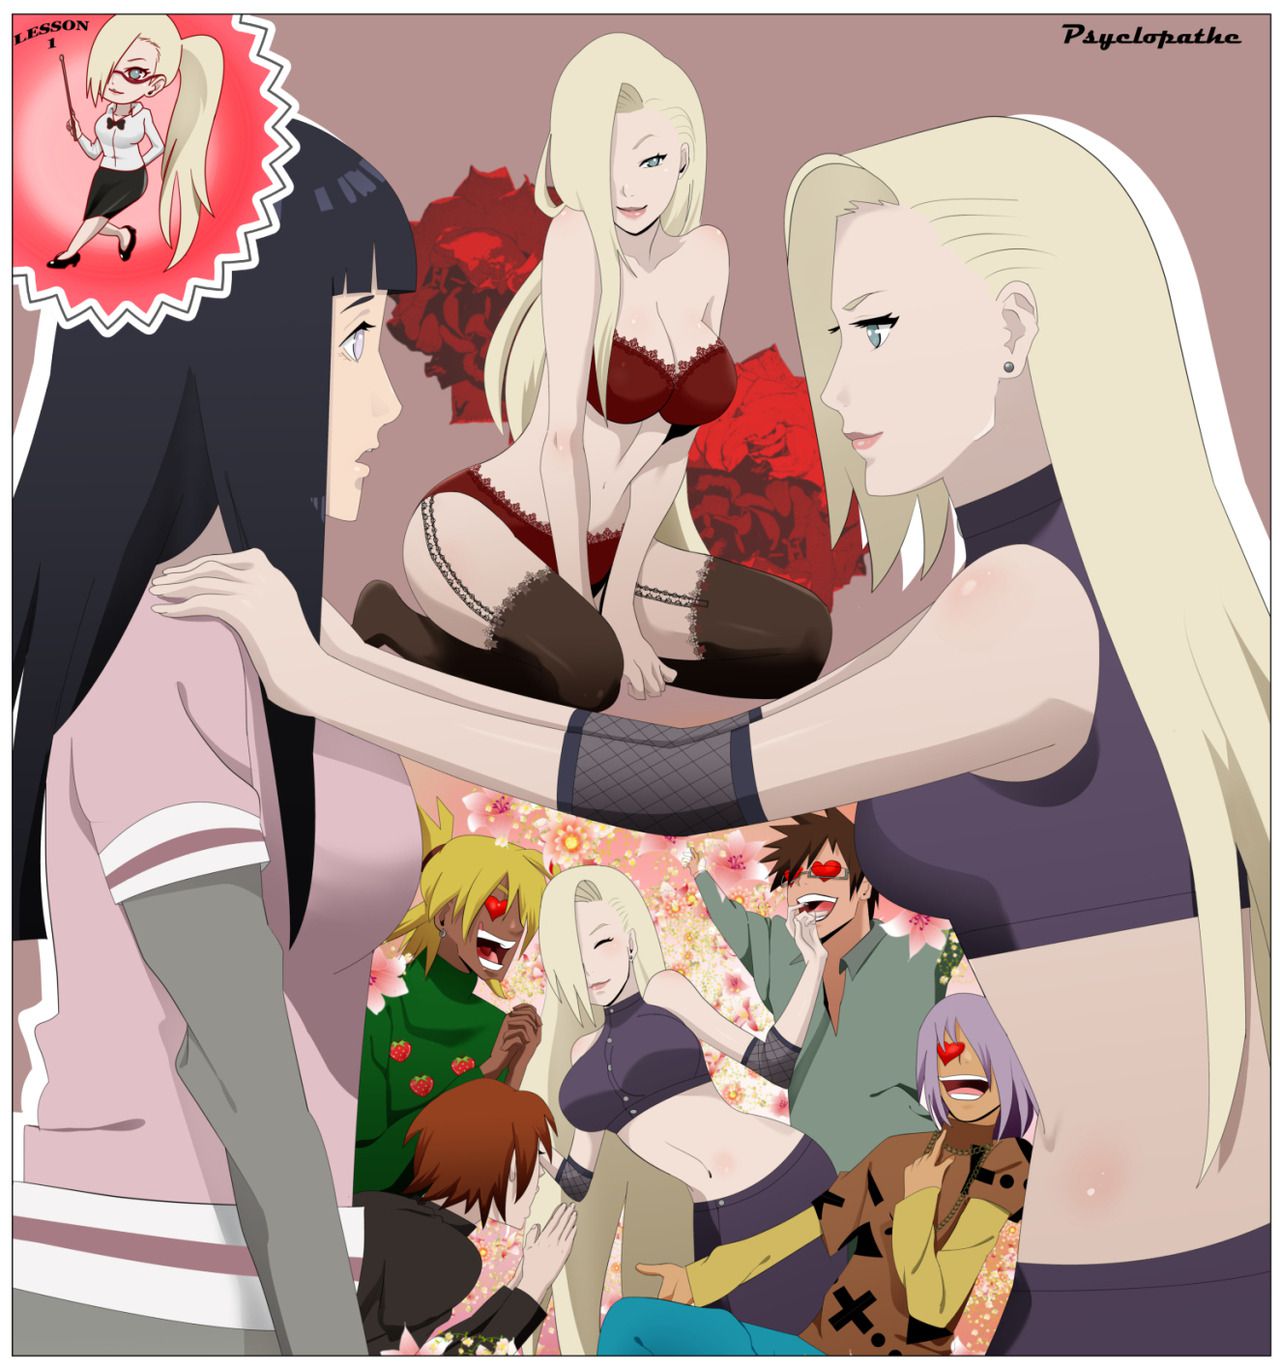 [psyclopathe] Bring down the shyness](Naruto)ongoing 5